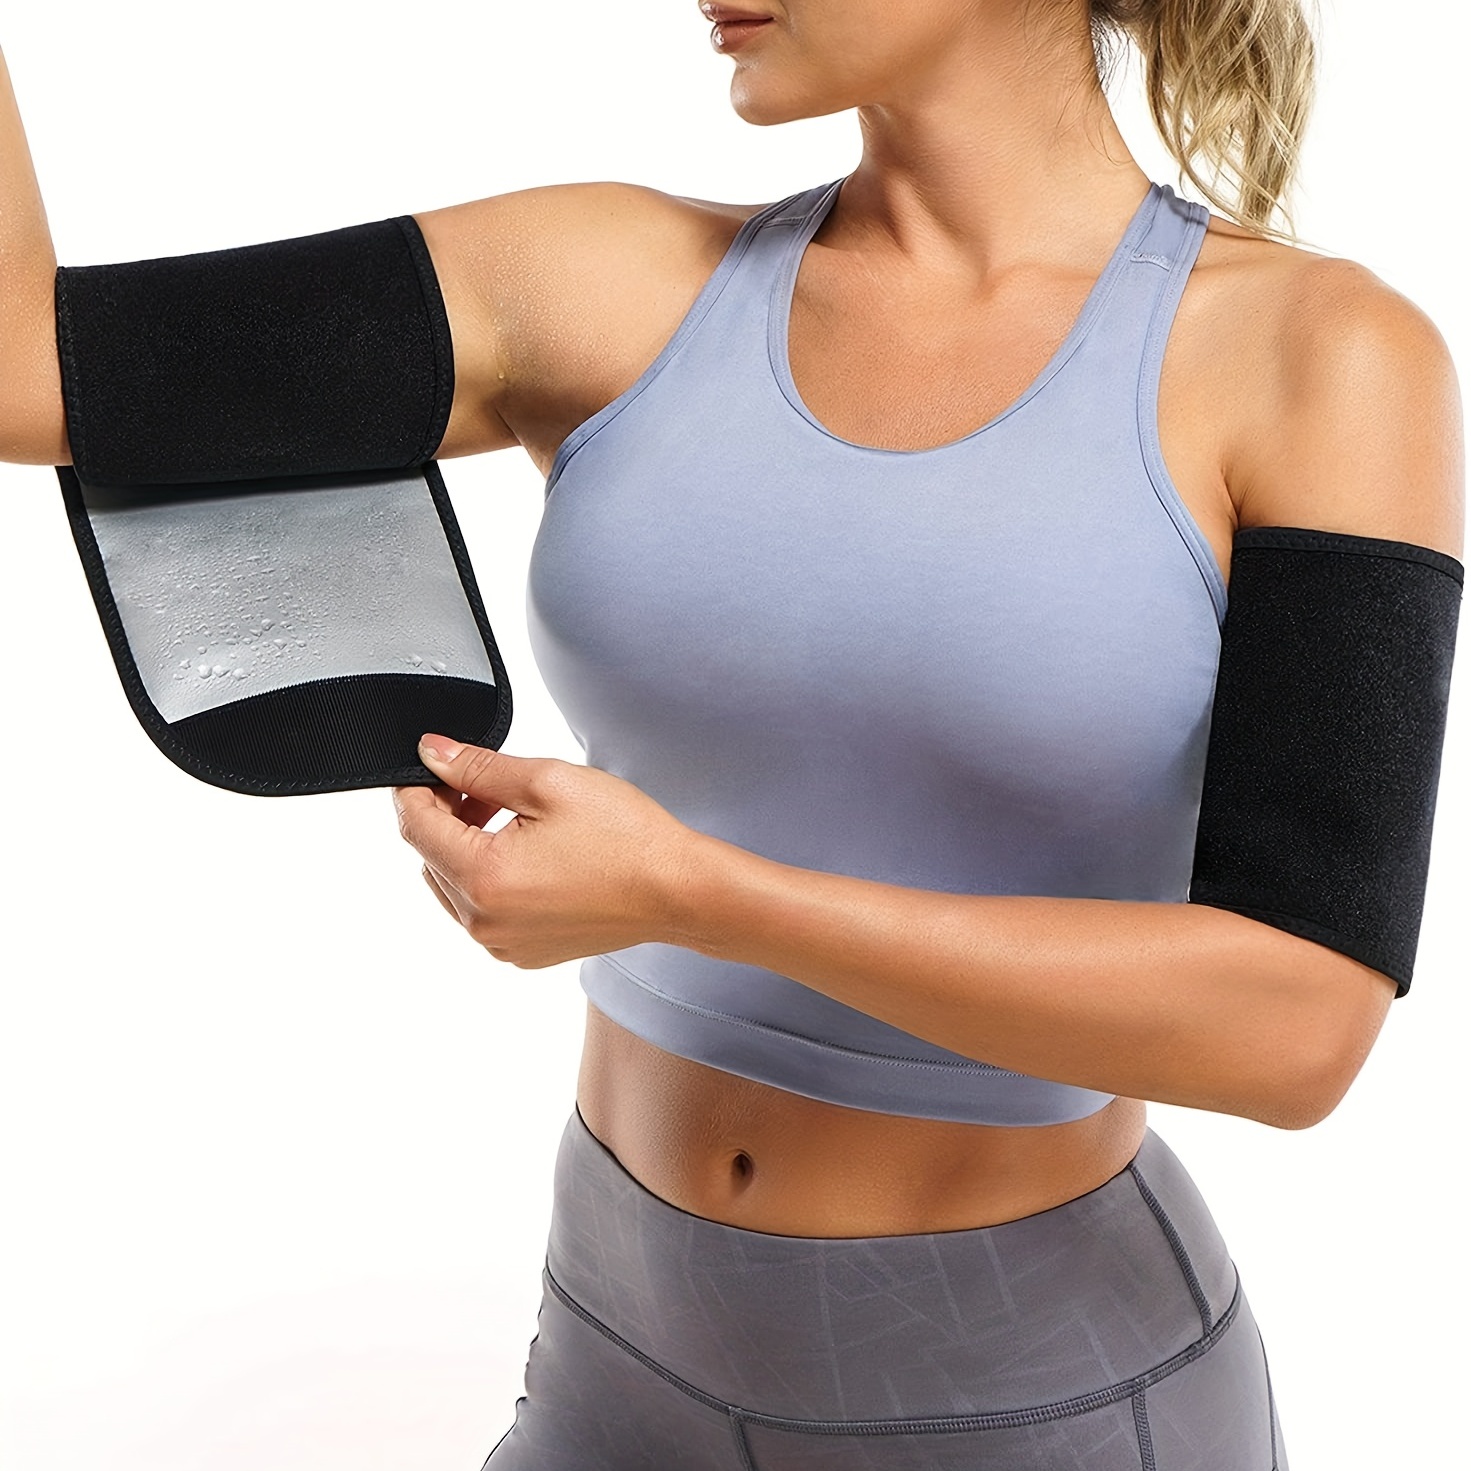 2 Pairs Arm Slimming Shapers for Women, Upper Arm Compression Sleeve  Shaper, Arm Wraps for Flabby Arms, Helps Shape Upper Arms Idear of Weight  Loss